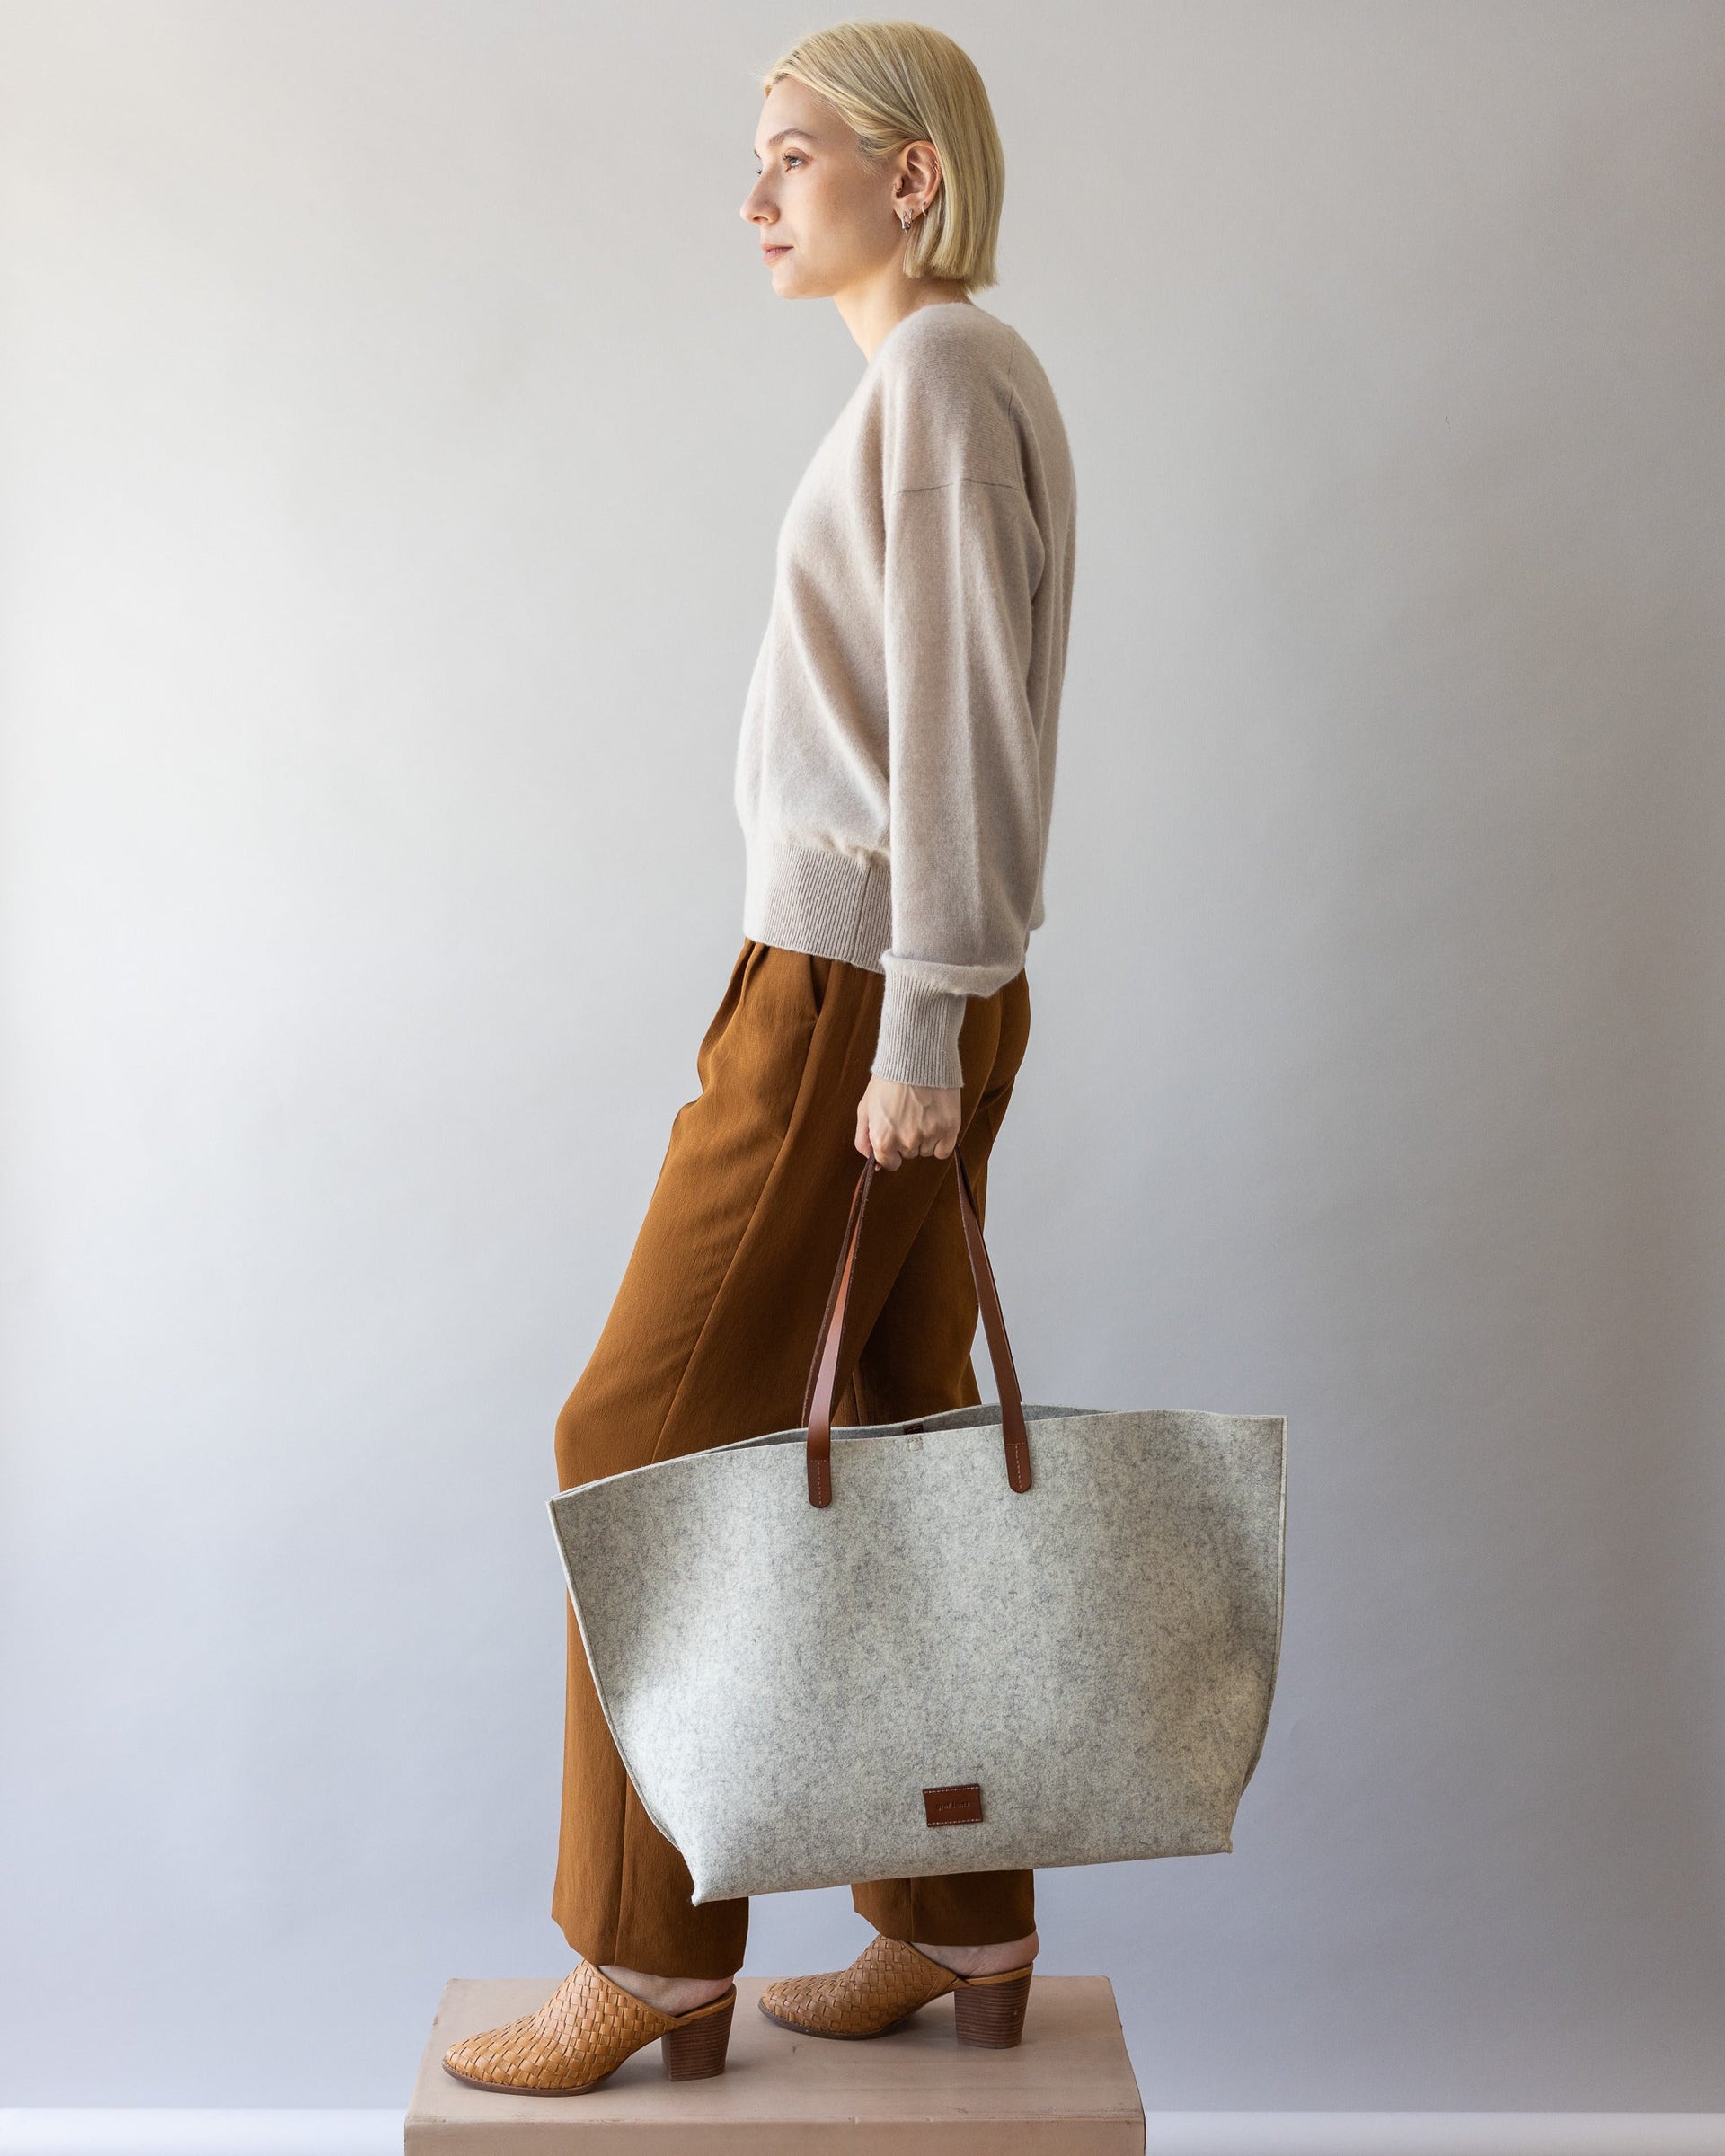 Standing woman holds brown leather straps of White Hana Merino Wool Boat Bag in one hand by her side, side view.